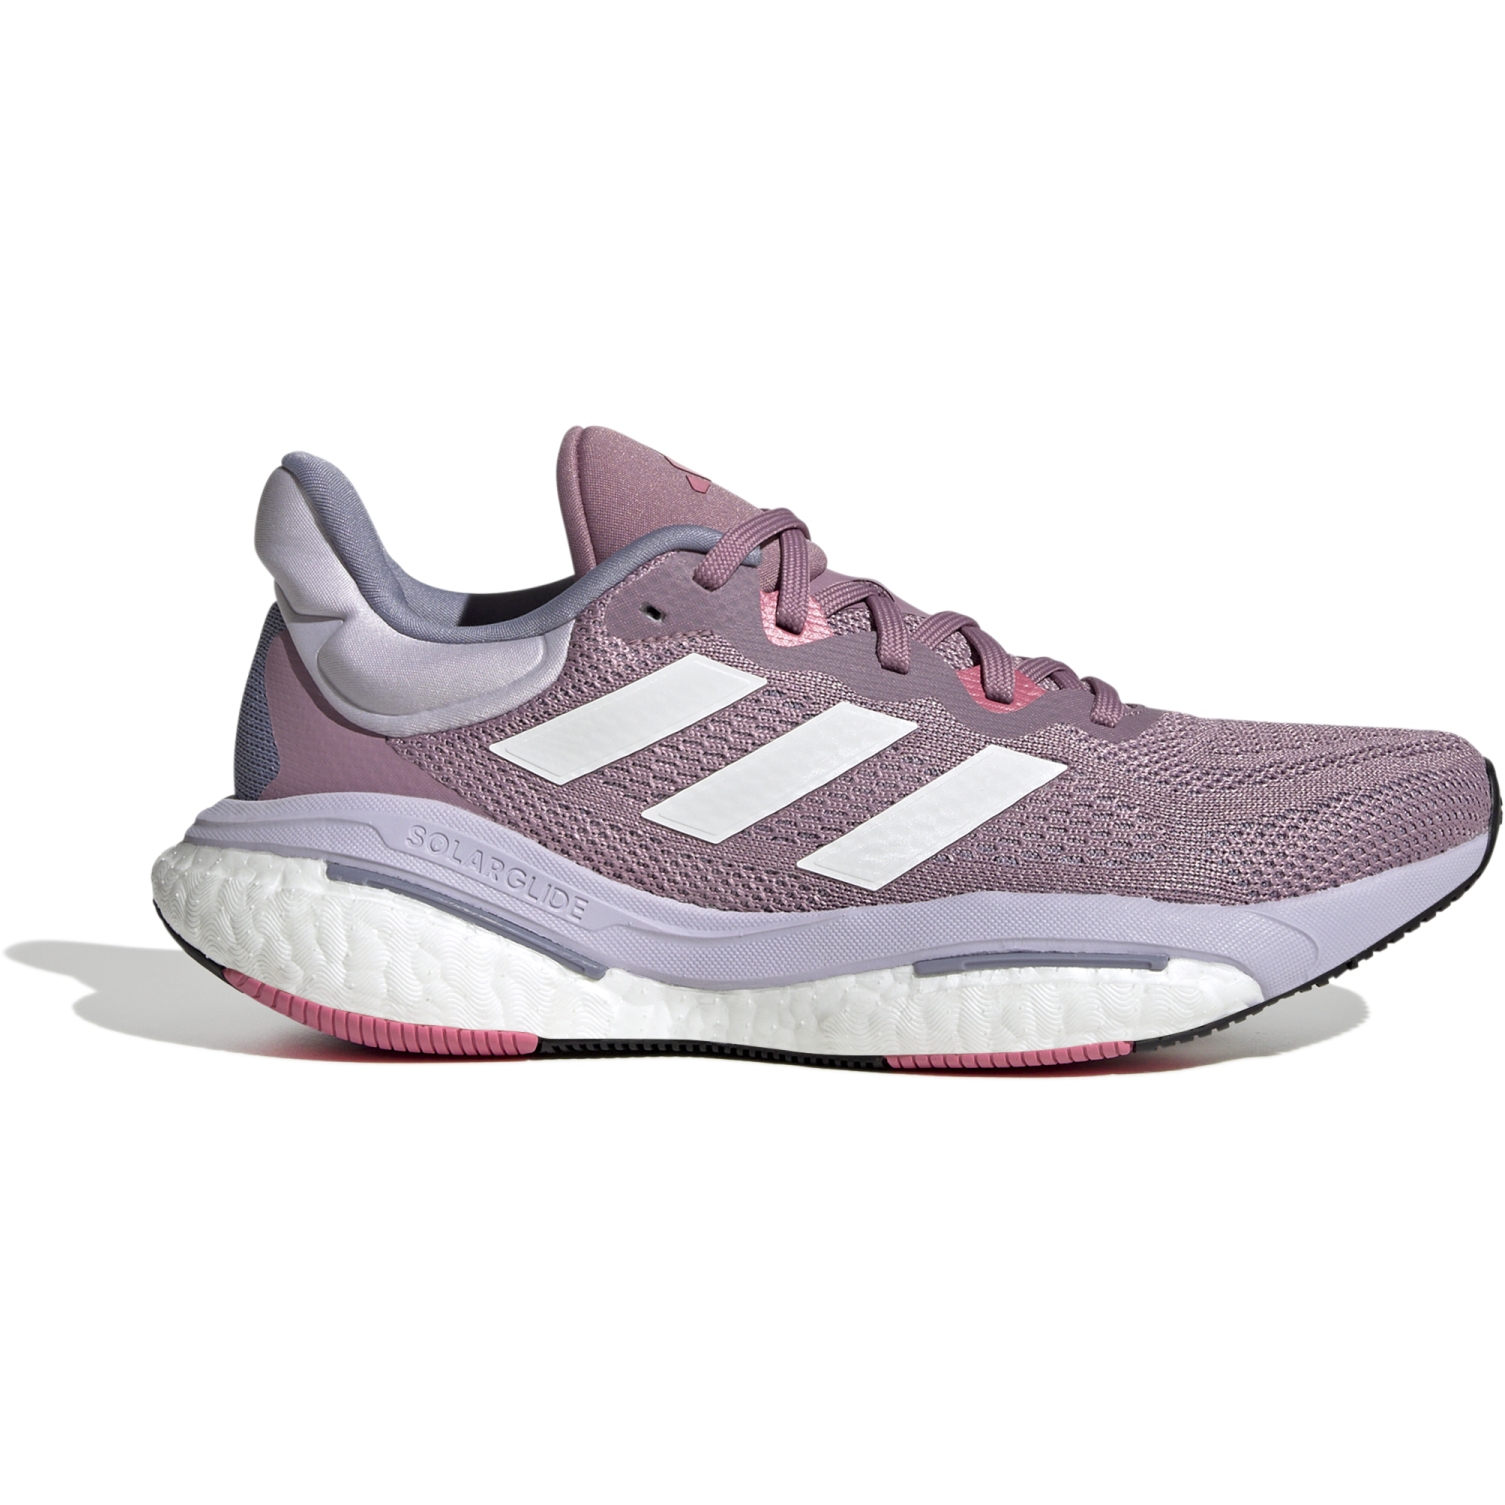 Picture of adidas Solarglide 6 Running Shoes Women - wonder orc/zero mint/pink fuss IE6797